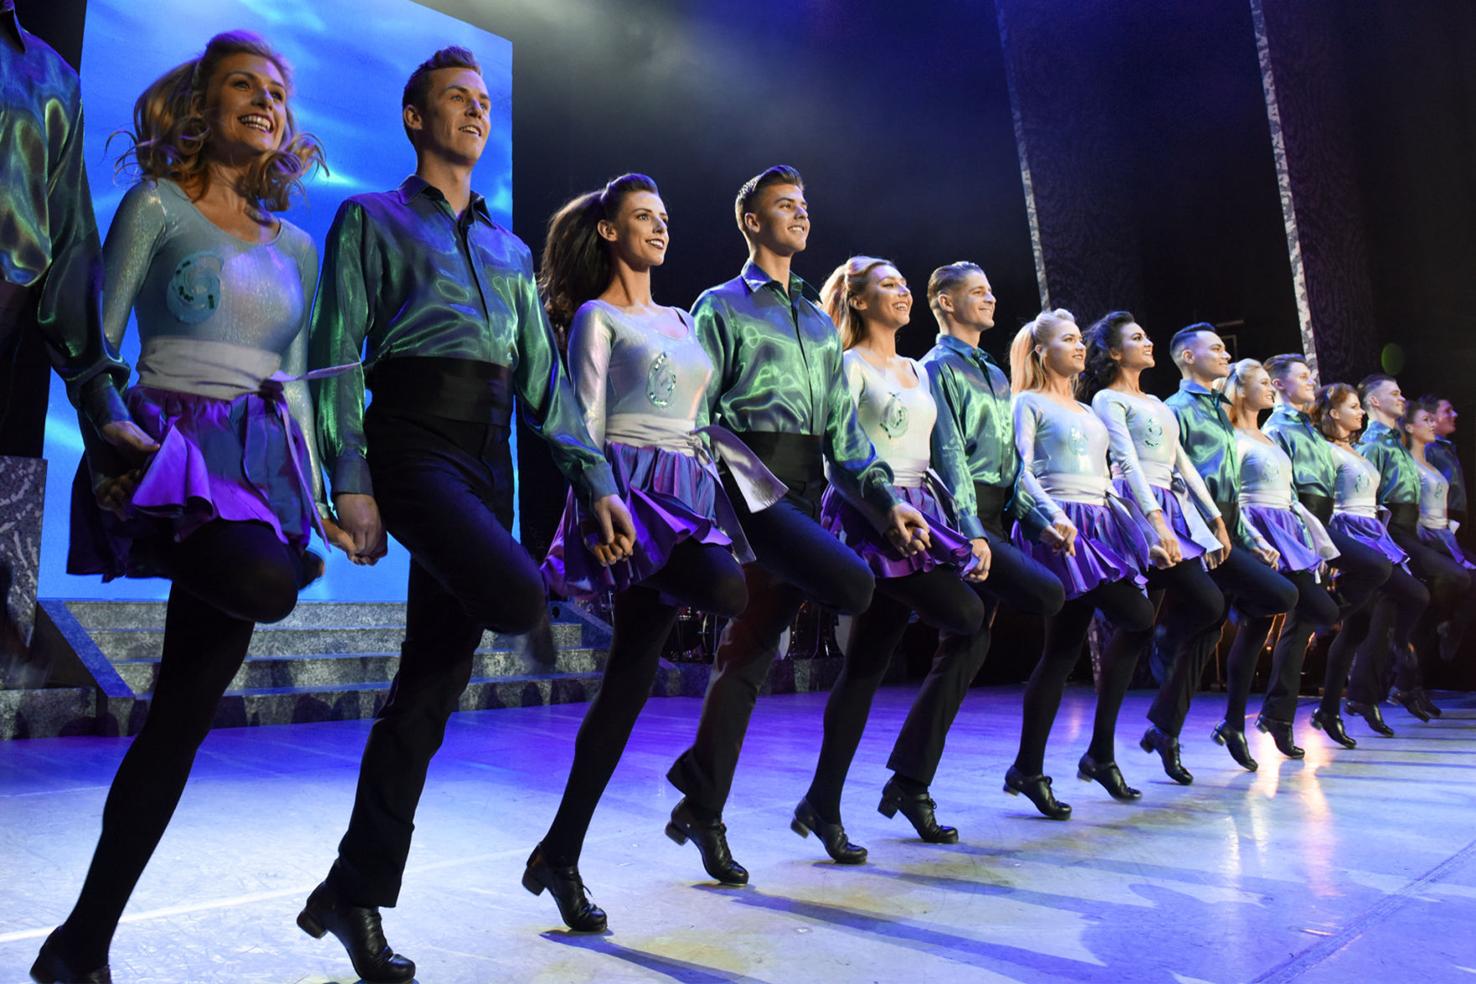 Riverdance's 25th anniversary tour has four shows in Lancaster this